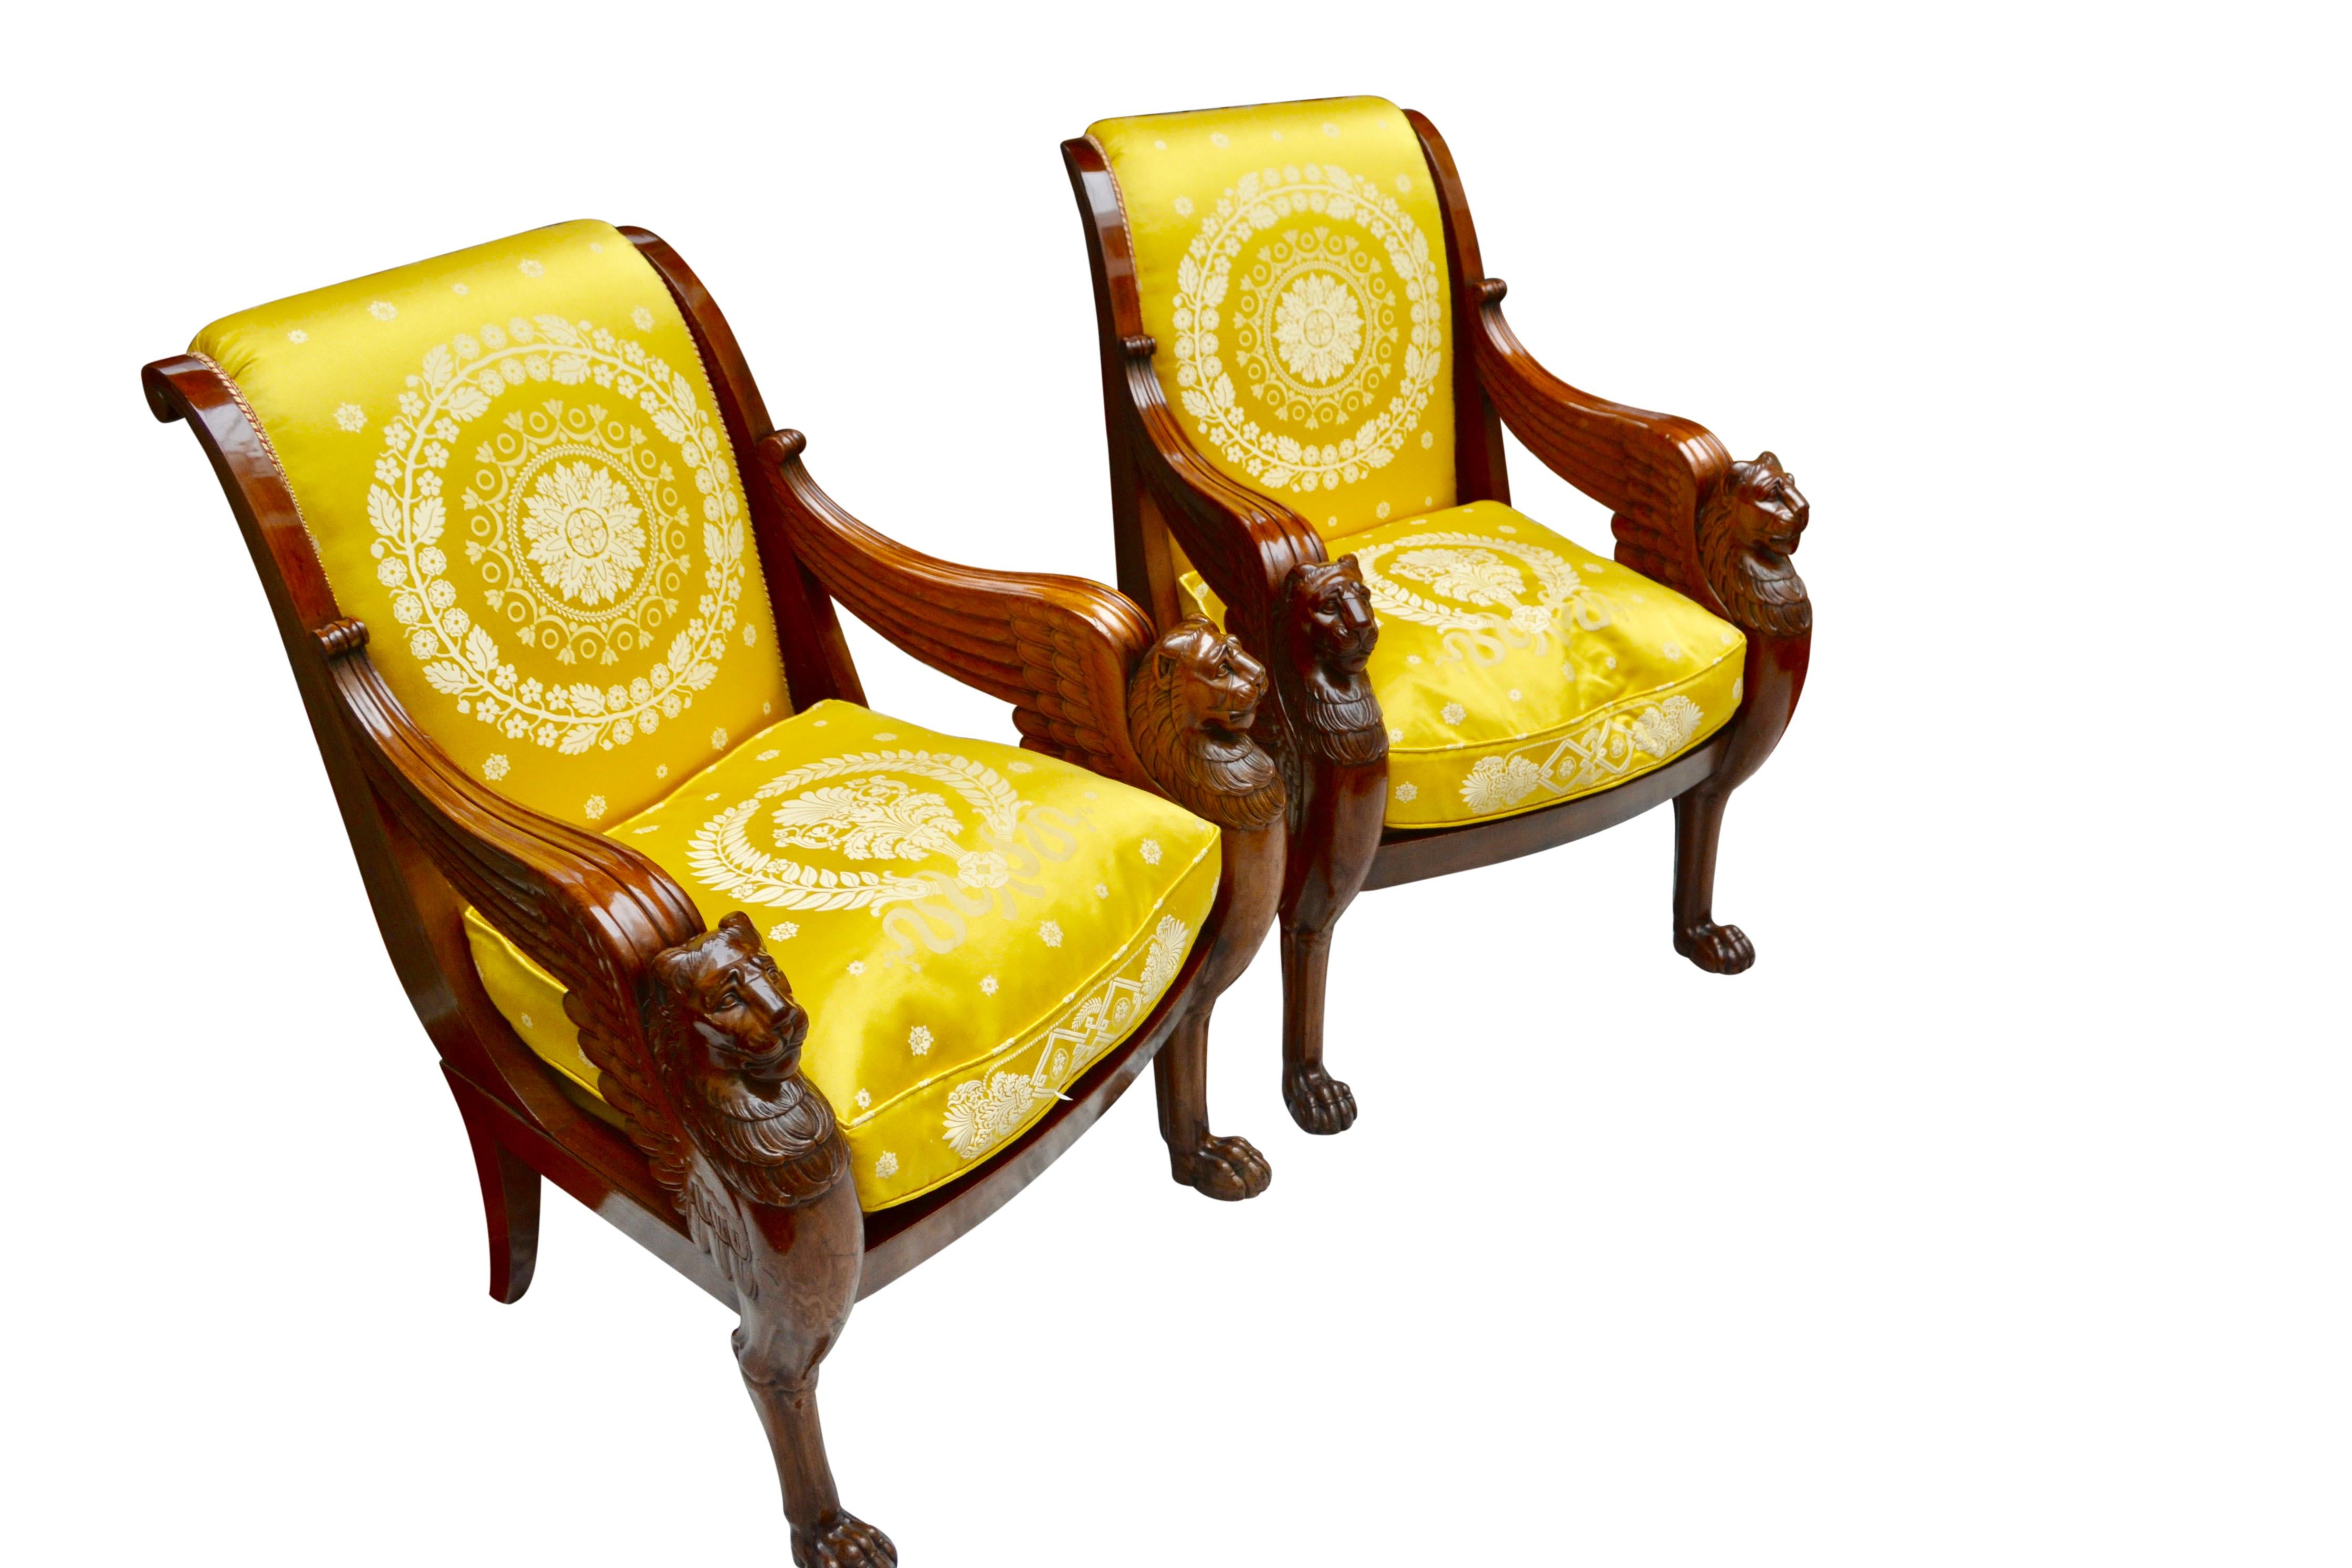 Carved Pair of French Empire Mahogany Armchairs Attributed to Jacob Desmalter